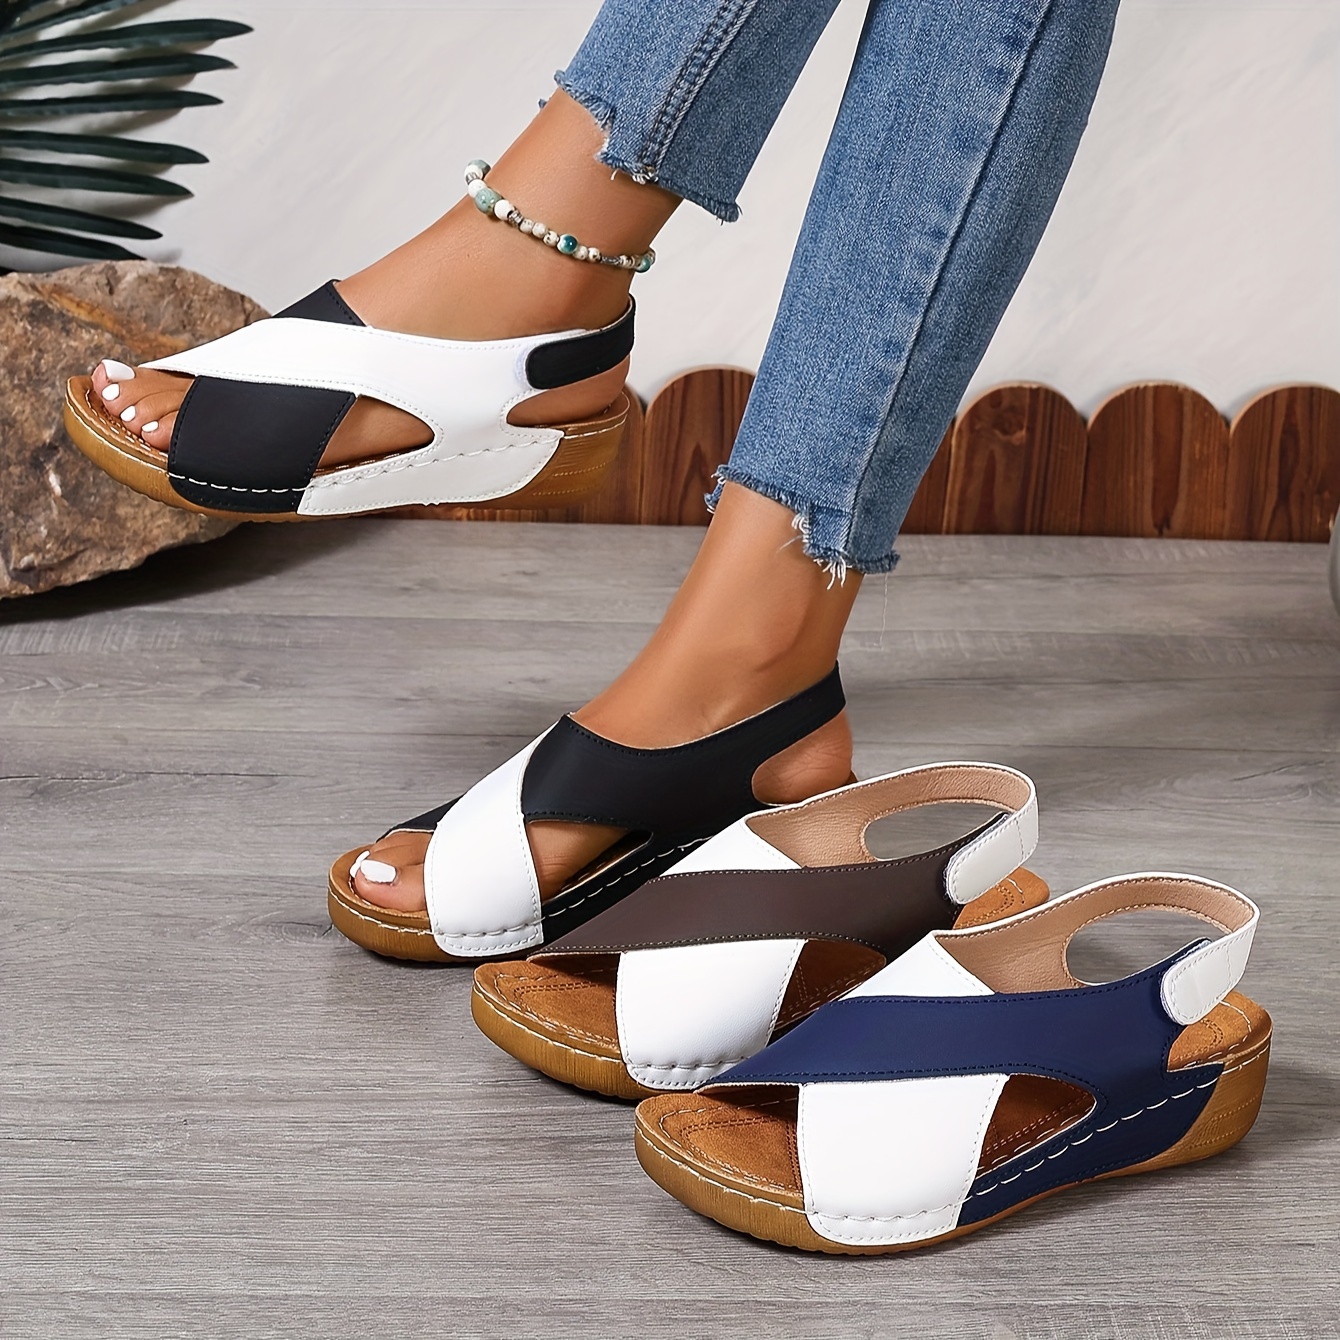 

Women's Contrast Color Wedge Sandals, Peep Toe Slingback Soft Sole Shoes, Comfy Outdoor Summer Sandals